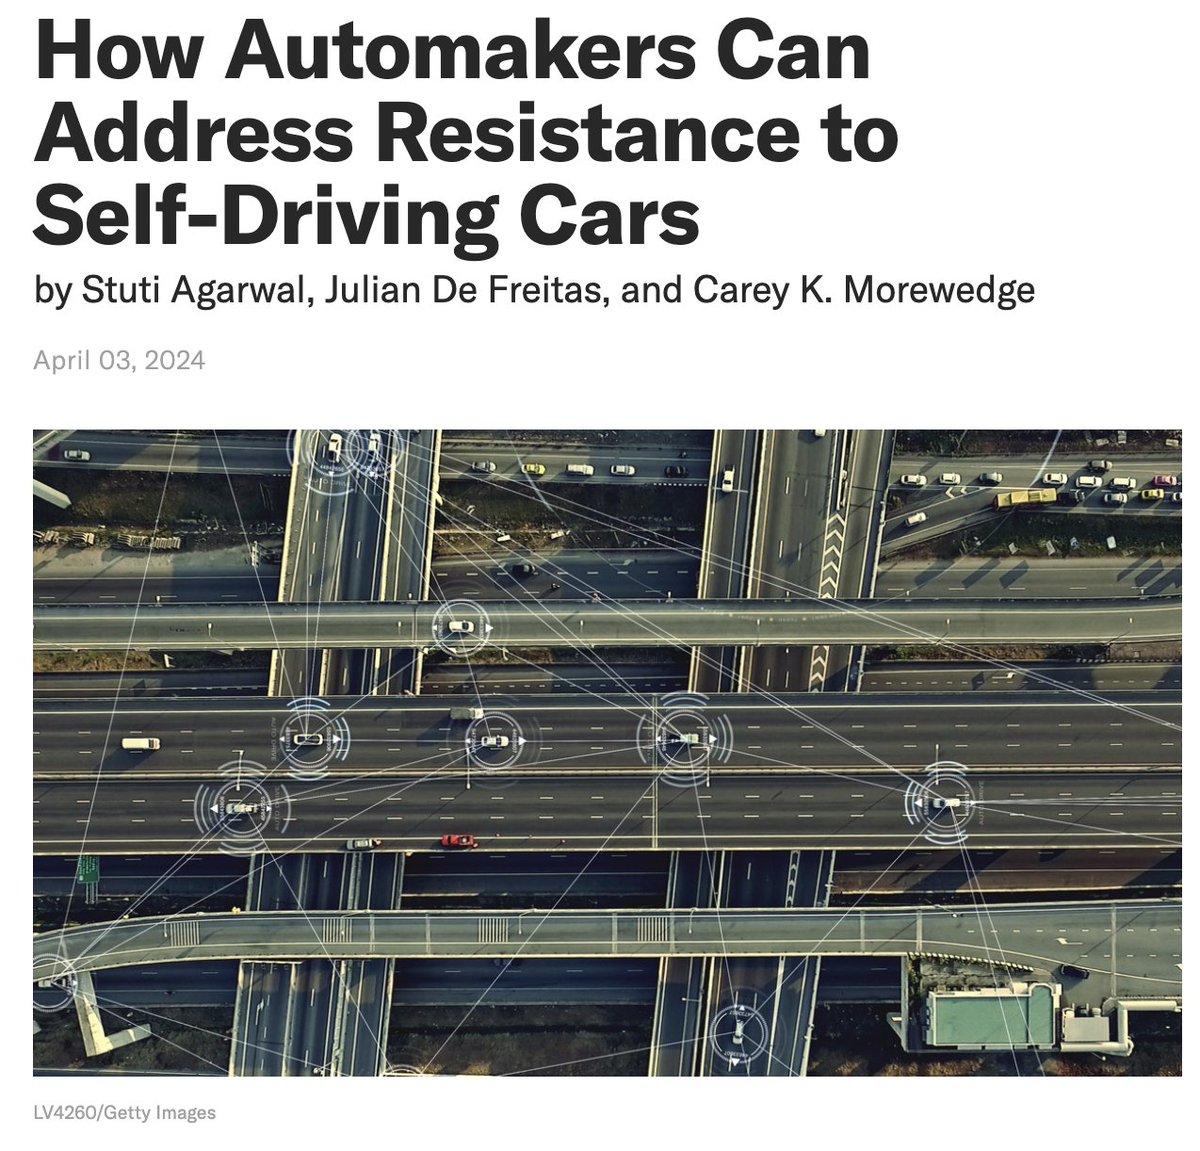 Feel like others could benefit from self-driving cars, but you don't need one? You're not alone. In @HarvardBiz, Stuti Agarwal, @JulianDeFreitas, and I unpack our research that shows how self-serving bias could slow the adoption of autonomous vehicles. hbr.org/2024/04/how-au…?